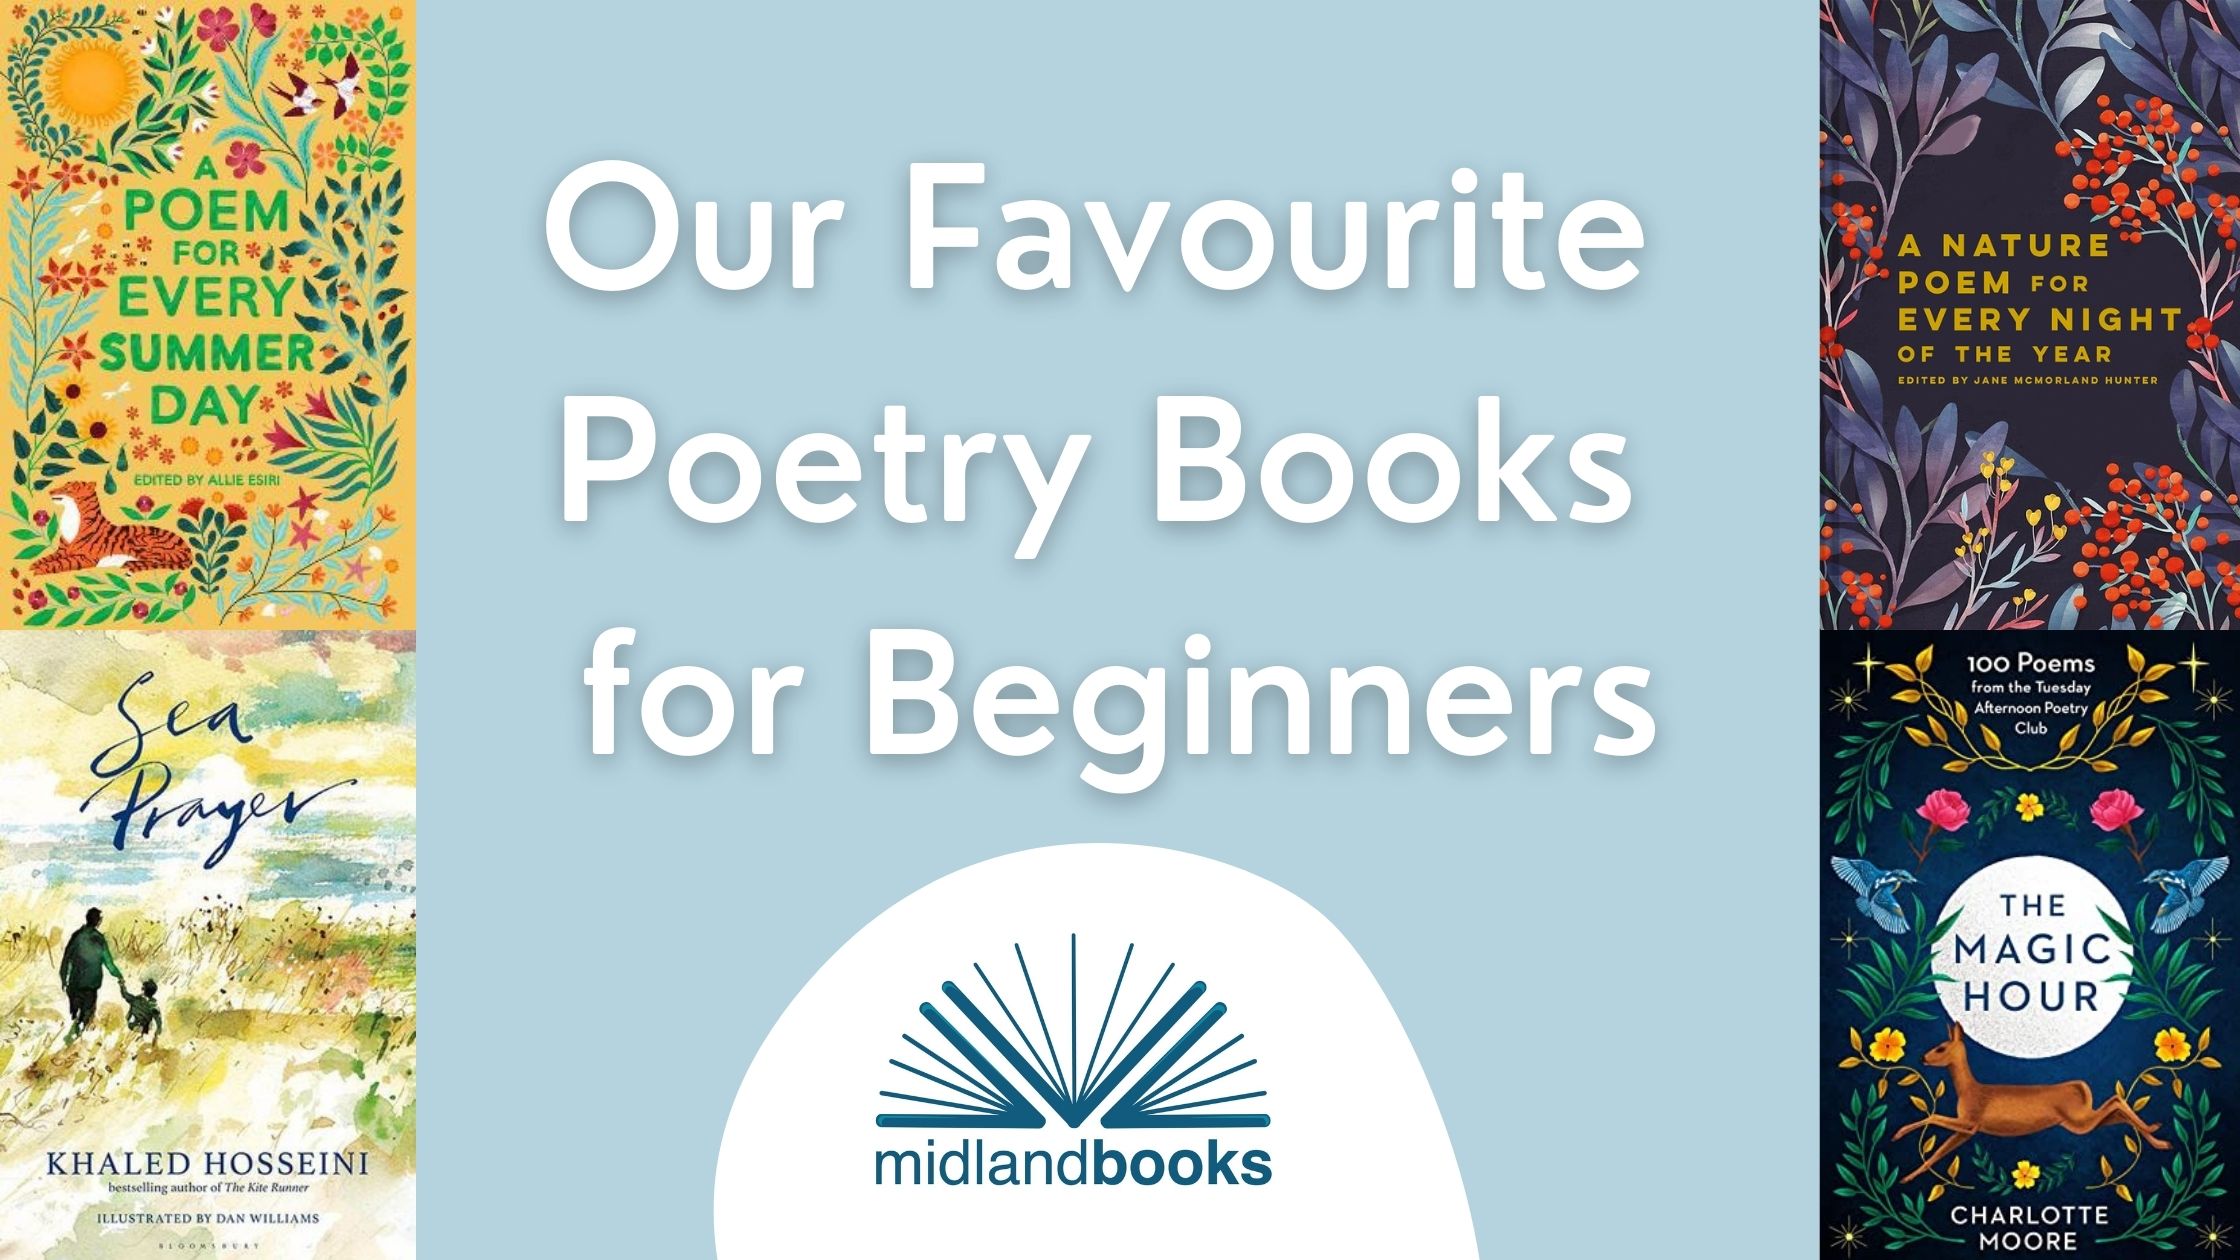 Our Favourite Poetry Books For Beginners - Midlandbooks